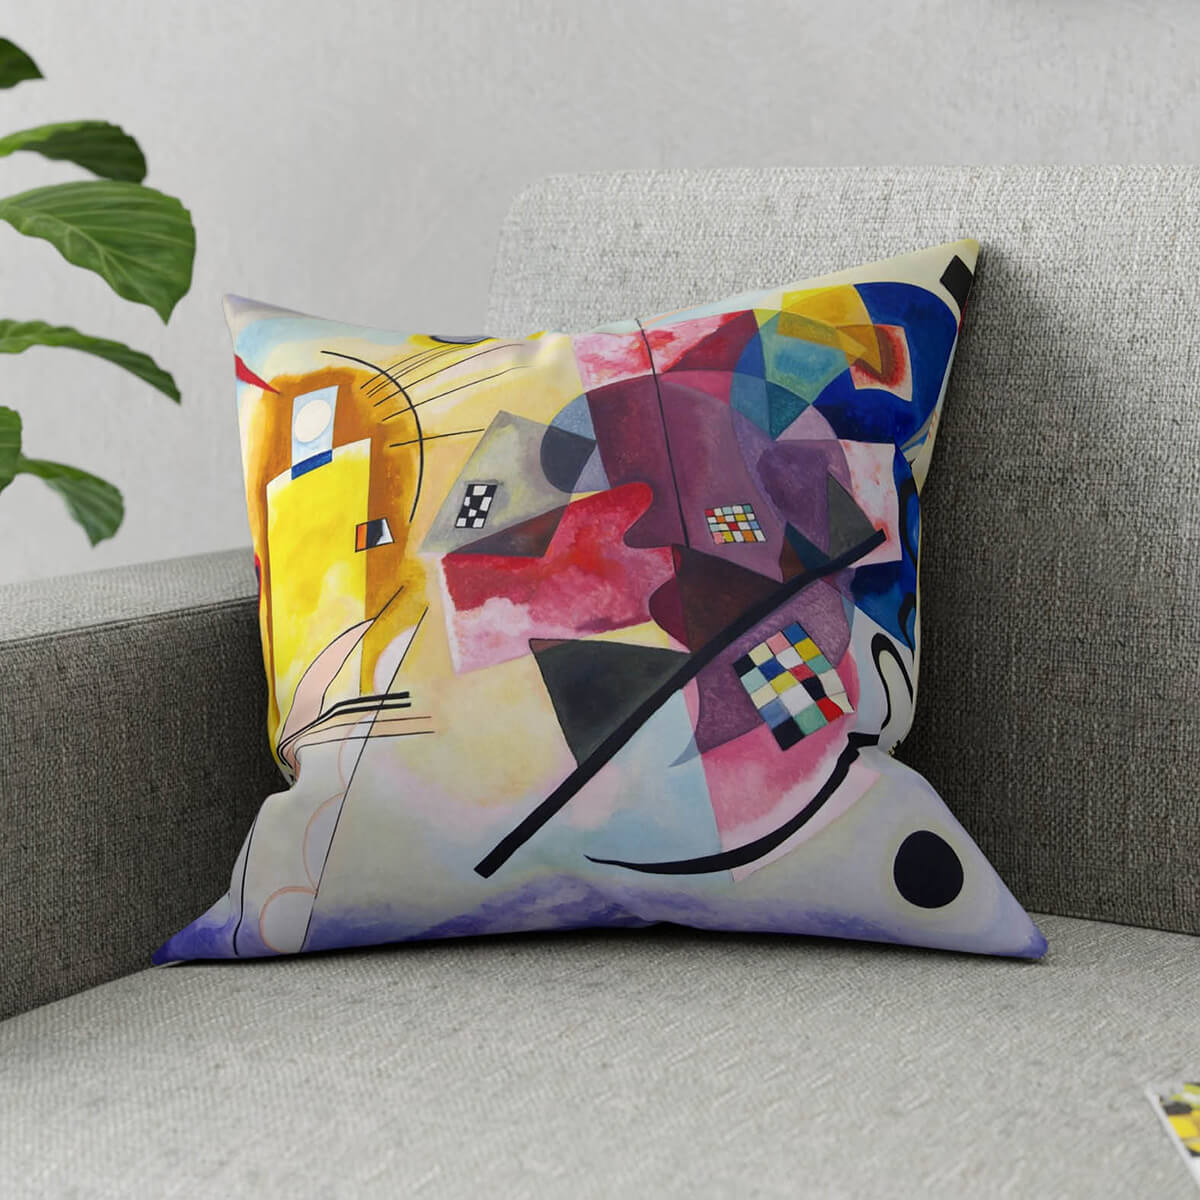 Vibrant Yellow Red Blue Accent Pillow - Living Room Decor Idea